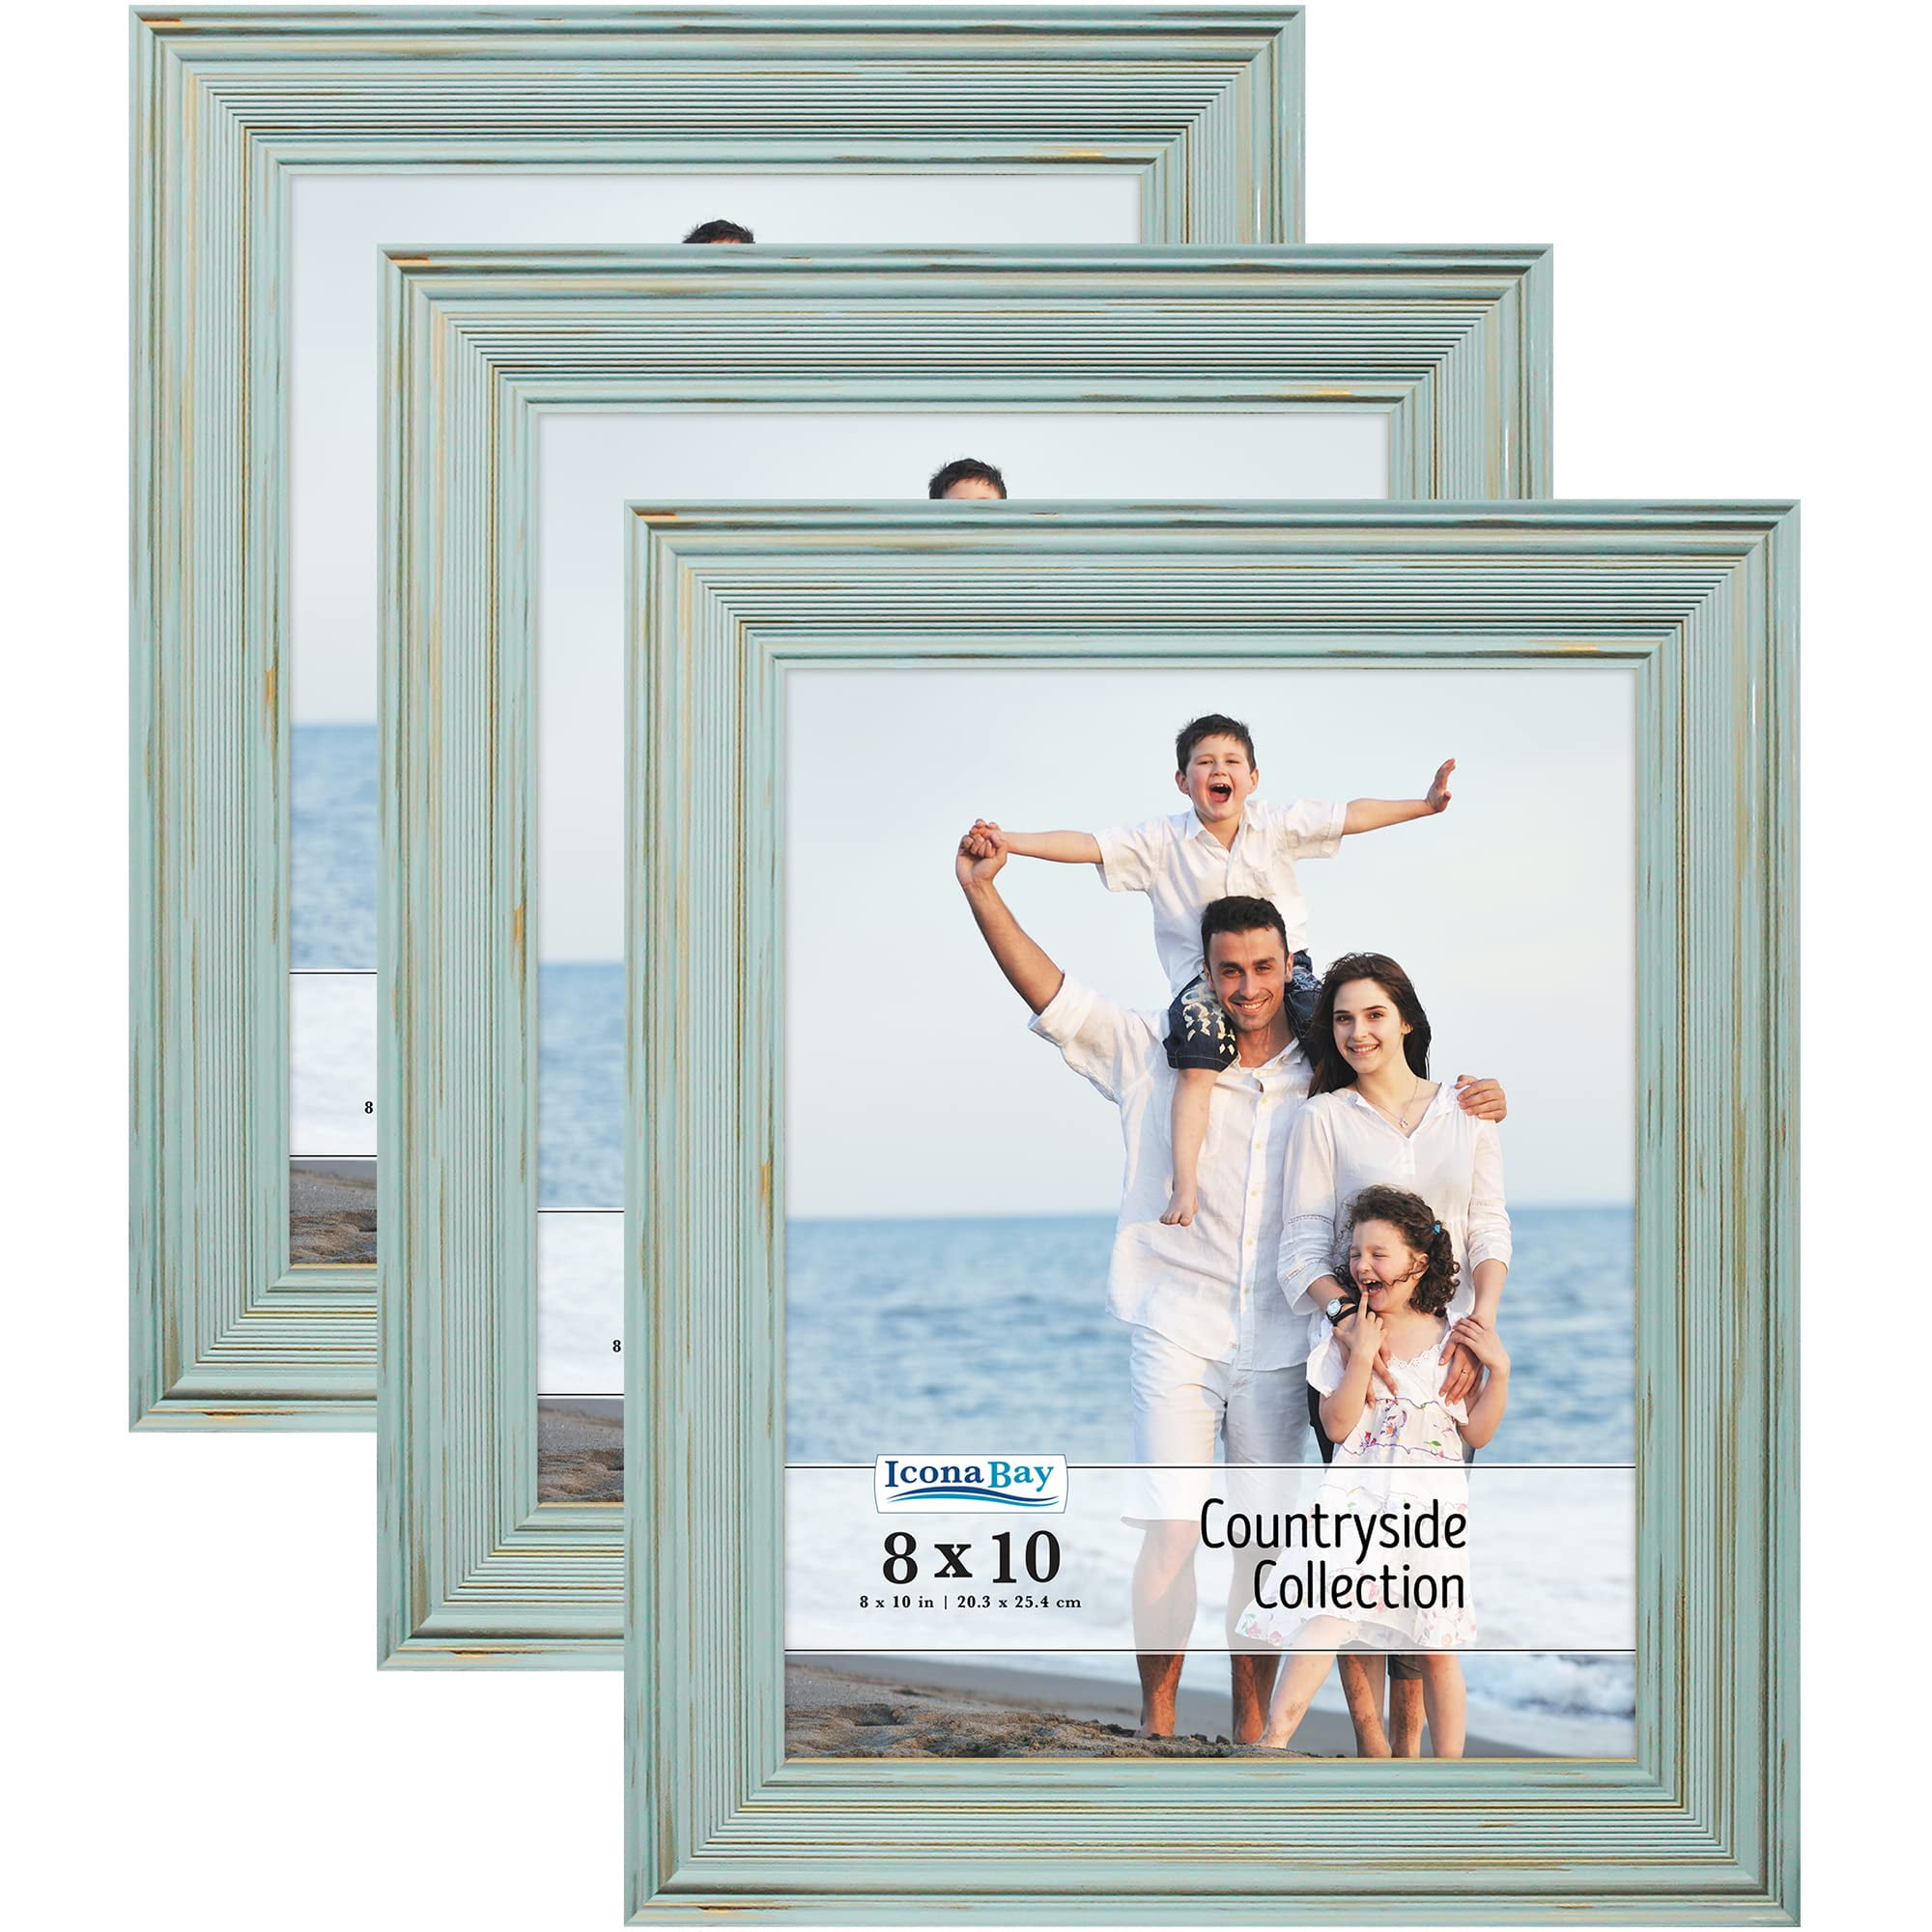 Set of 12-8x10 Dark Walnut Wood Picture Frames and Clear Glass $15 SHIPPING 